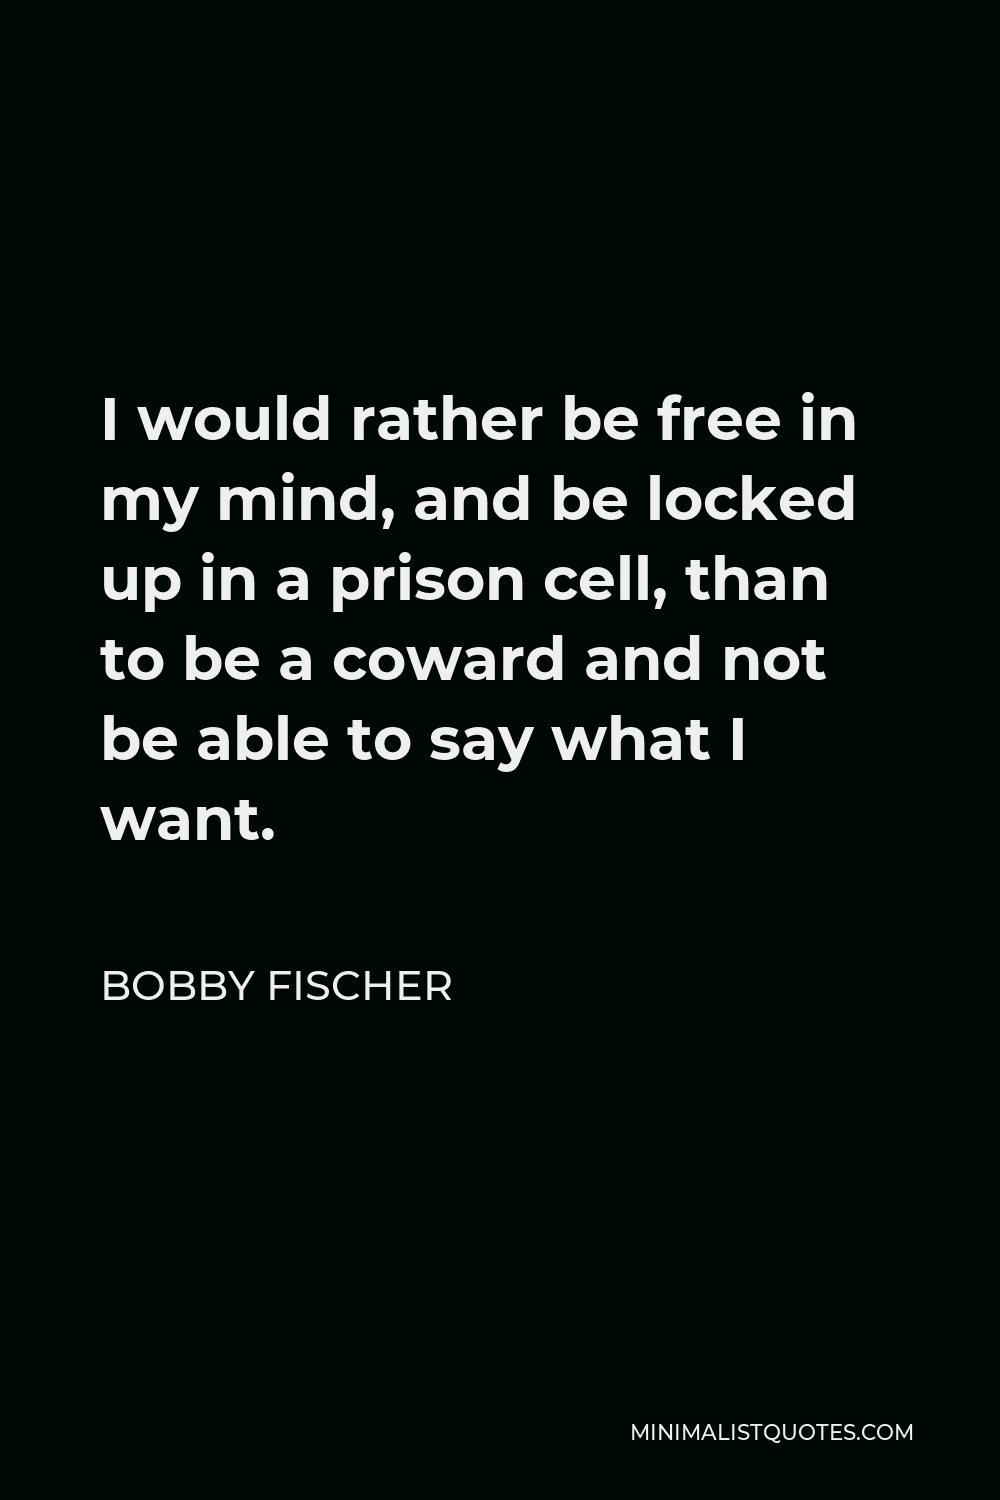 Bobby Fischer Quote - I would rather be free in my mind, and be locked up in a prison cell, than to be a coward and not be able to say what I want.